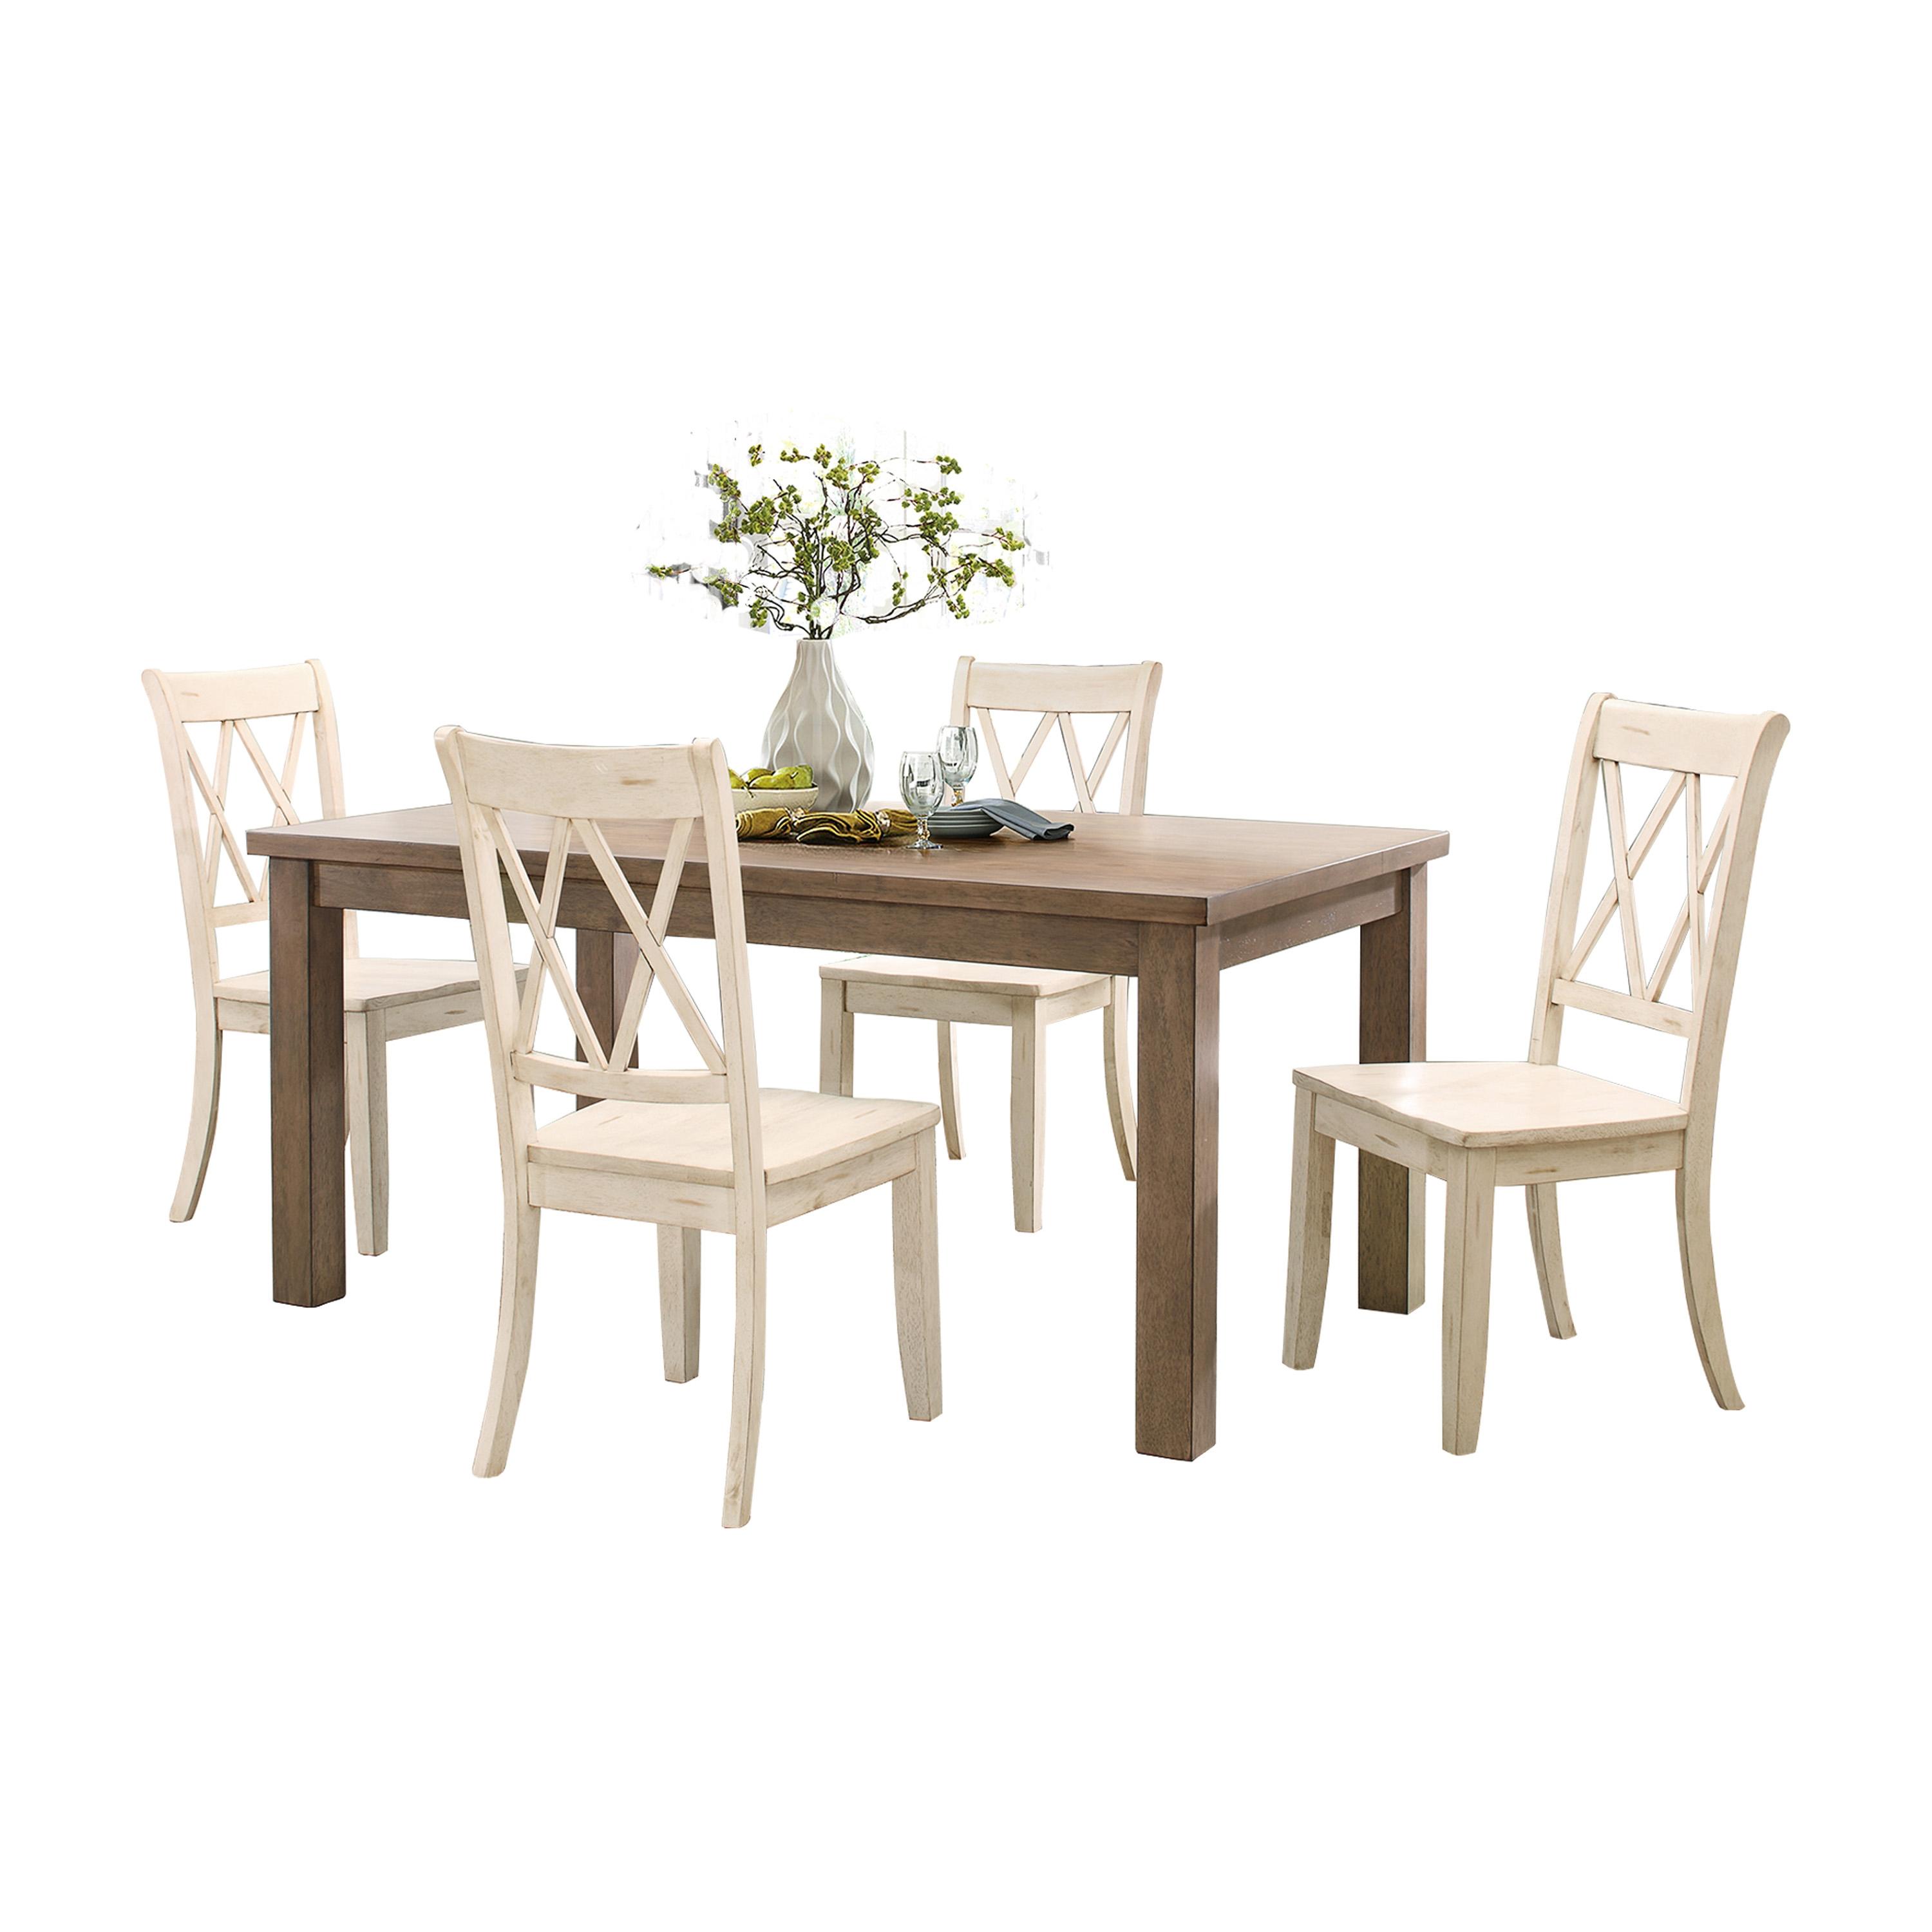 Transitional Dining Room Set 5516-66-WT*5PC Janina 5516-66-WT*5PC in White 